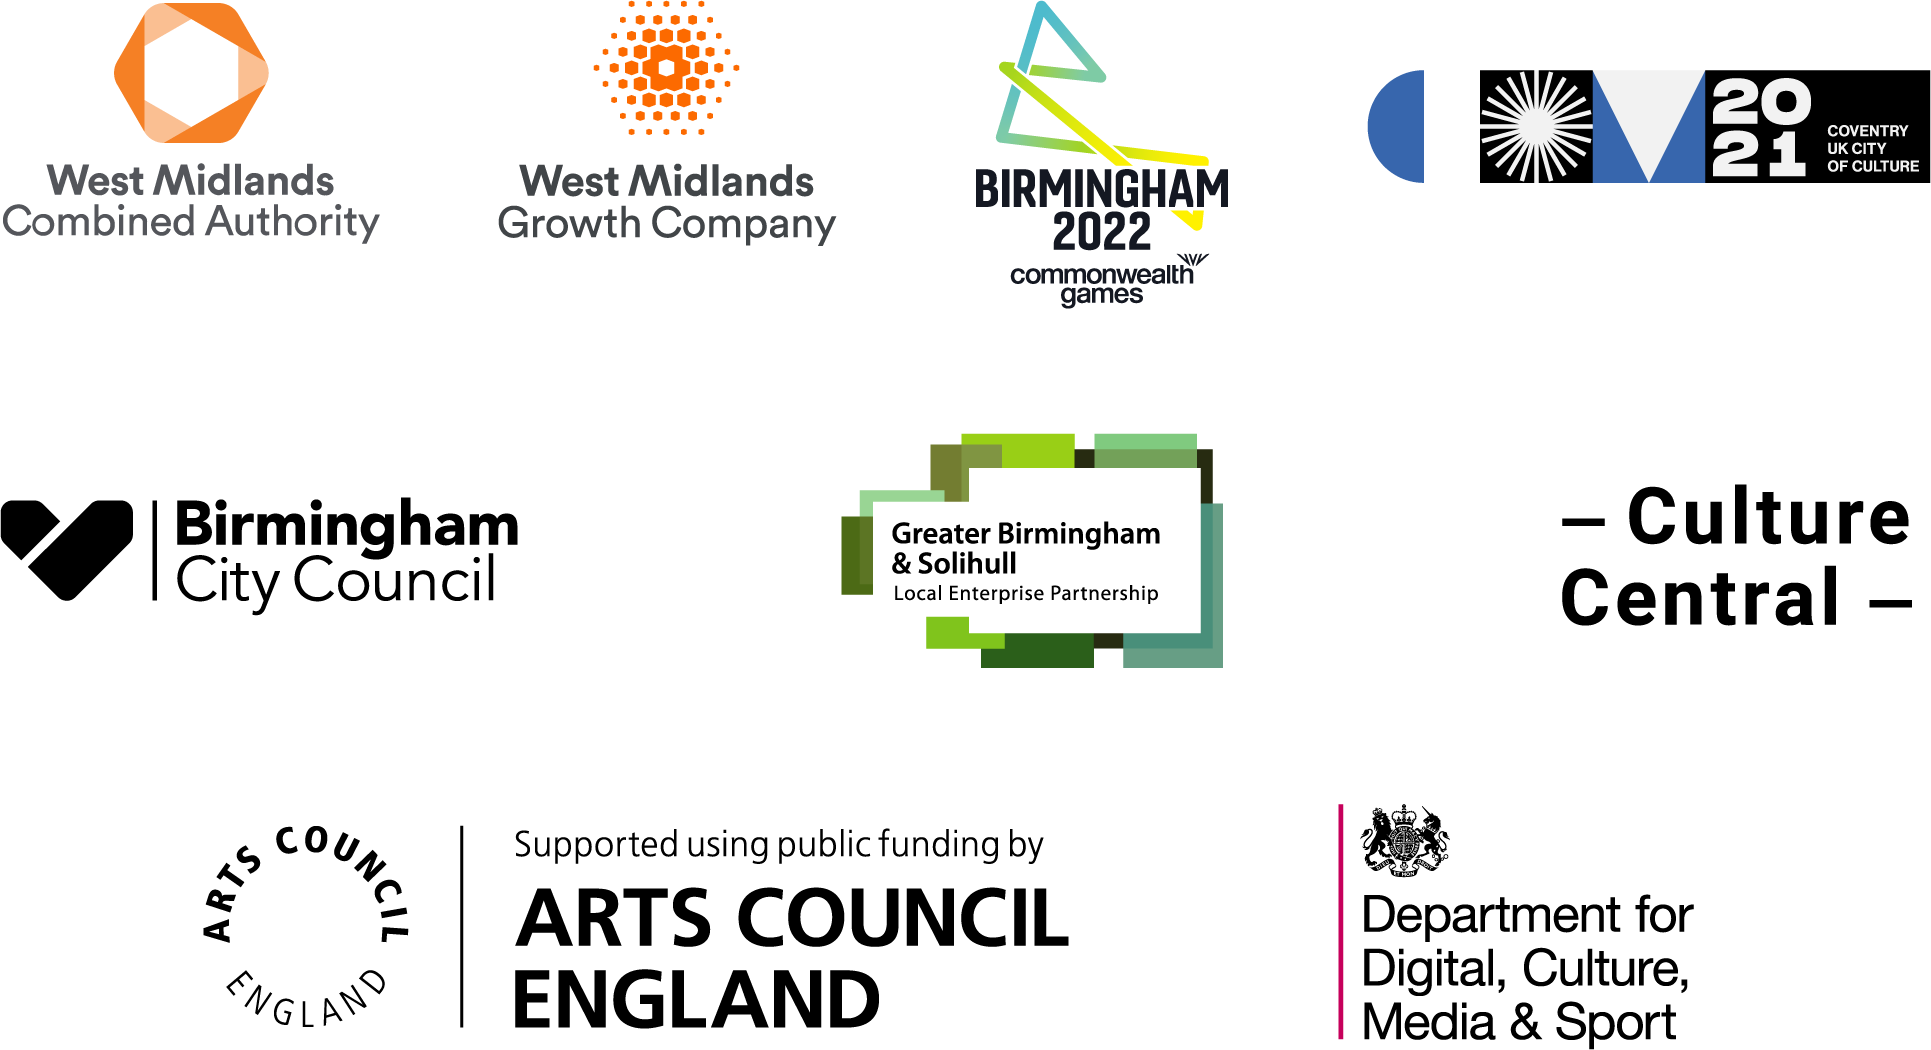 Organisation logos: WMCA, West Midlands Growth Company, Birmingham 2022 Commonwealth Games, Coventry City of Culture 2021, Birmingham City Council, Greater Birmingham and Solihull LEP, Culture Central, Arts Council England, Department for Digital and Culture, Media and Sport.